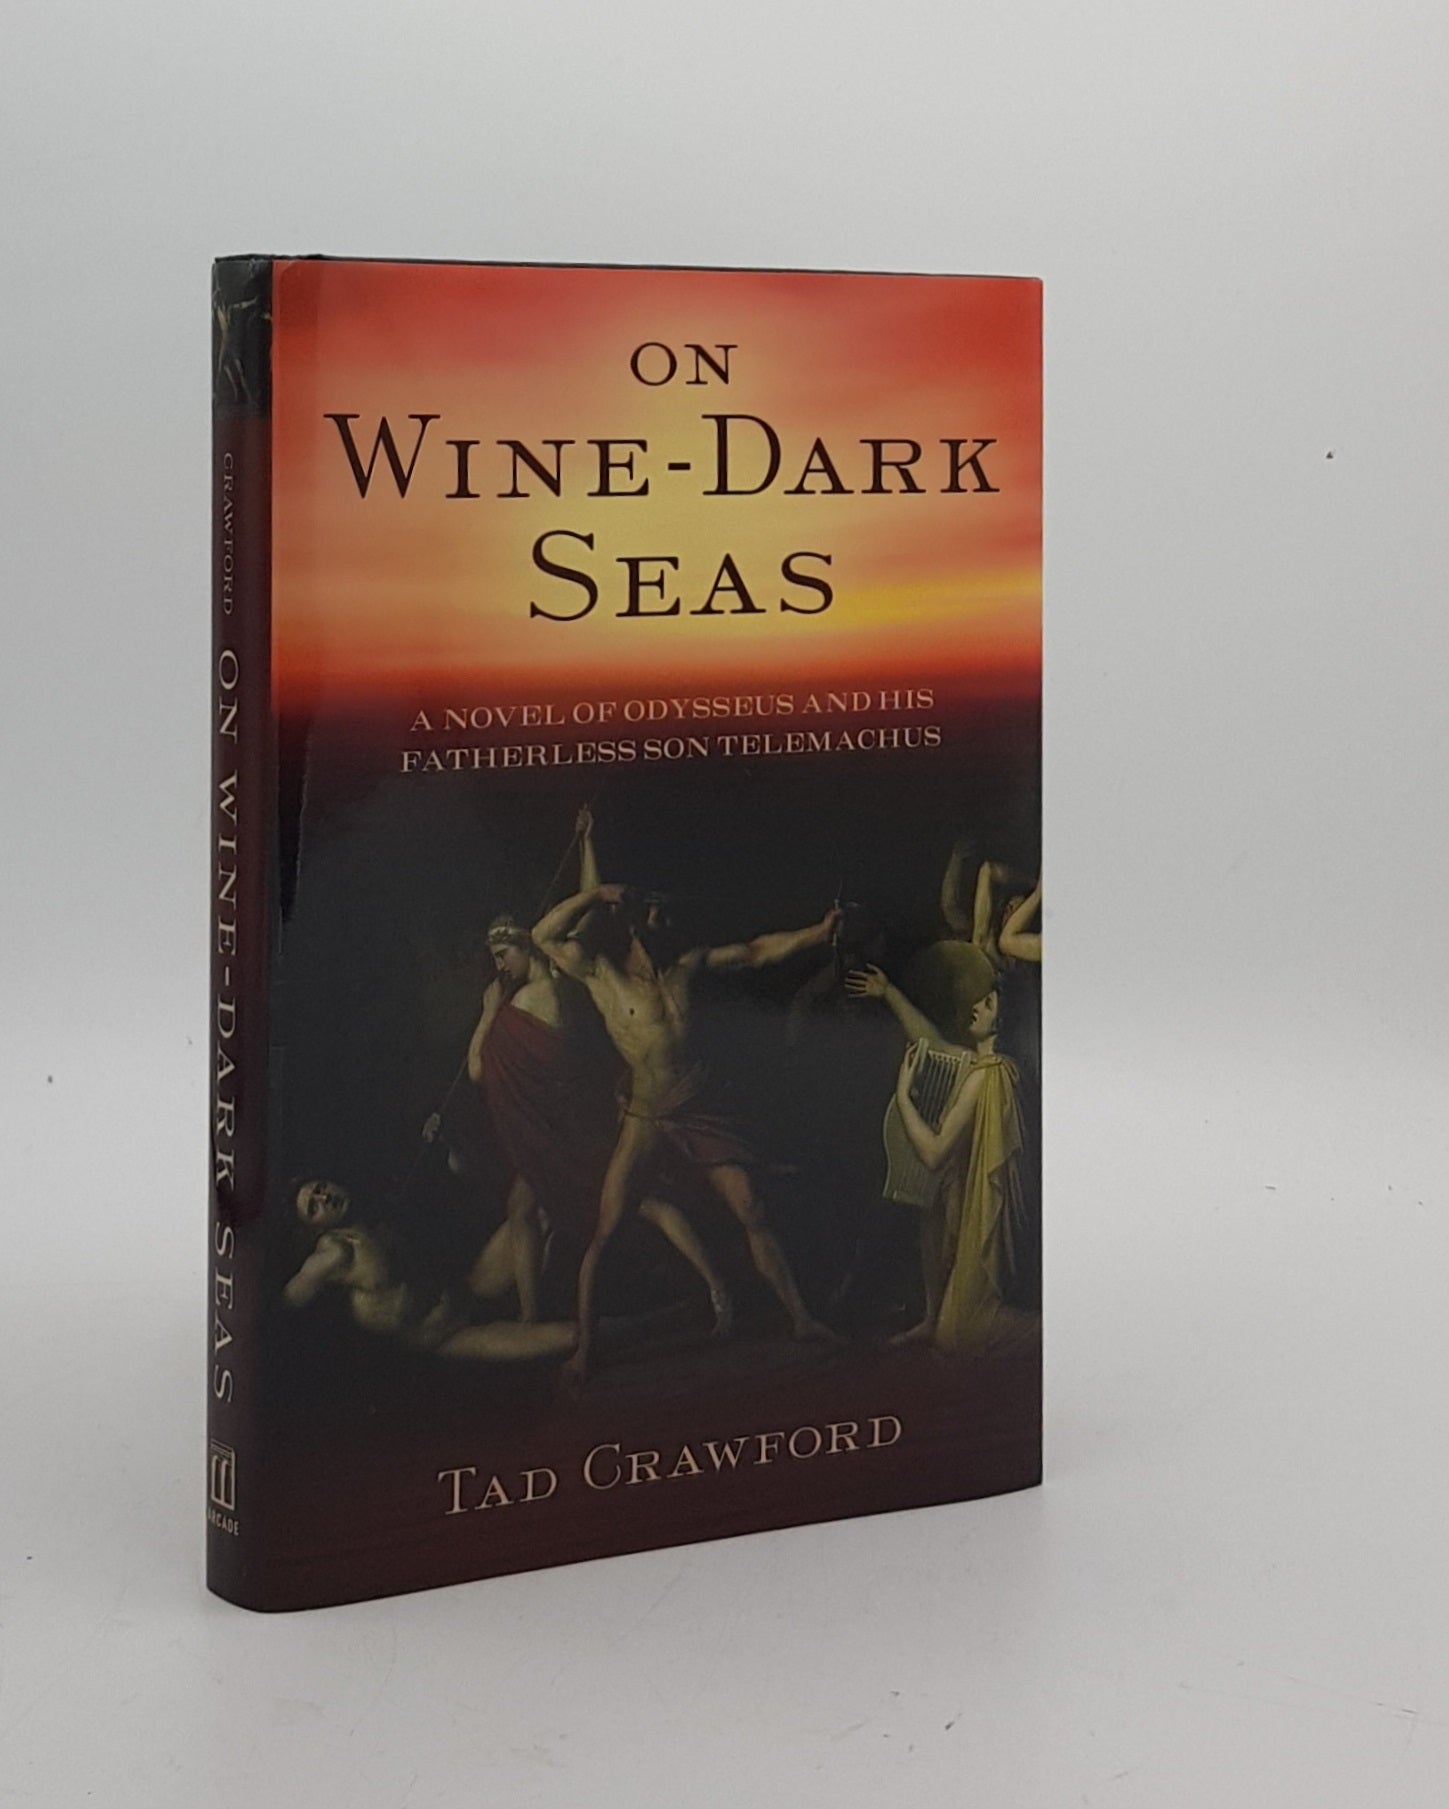 CRAWFORD Tad - On Wine-Dark Seas a Novel of Odysseus and His Fatherless Son Telemachus